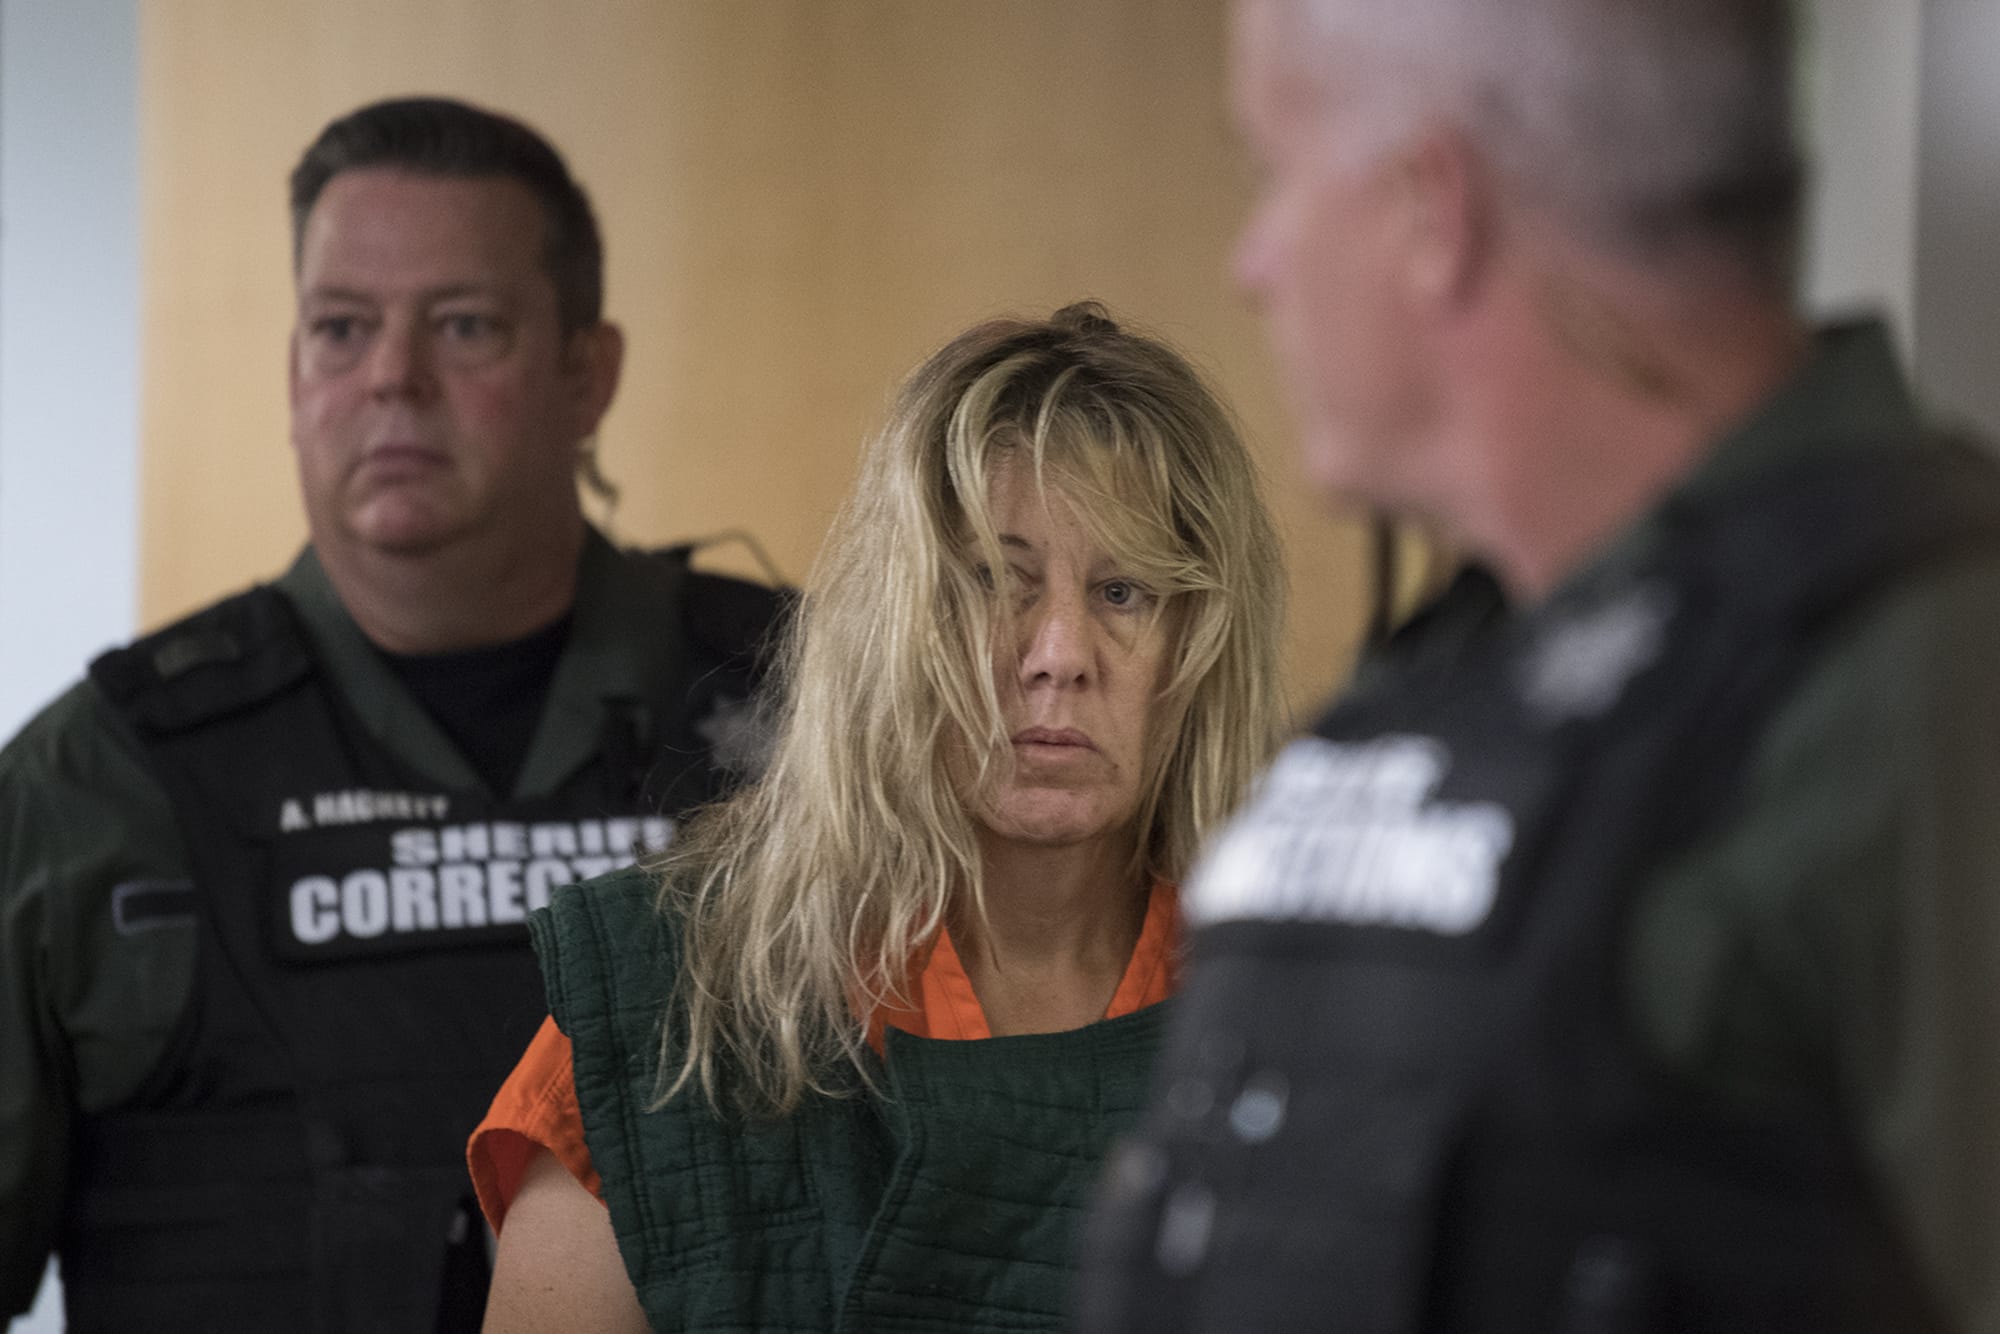 Stephanie "Sam" Westby makes a first appearance Tuesday morning in Clark County Superior Court on suspicion of first-degree domestic violence murder in the slaying of her husband, 51-year-old Joseph Westby.